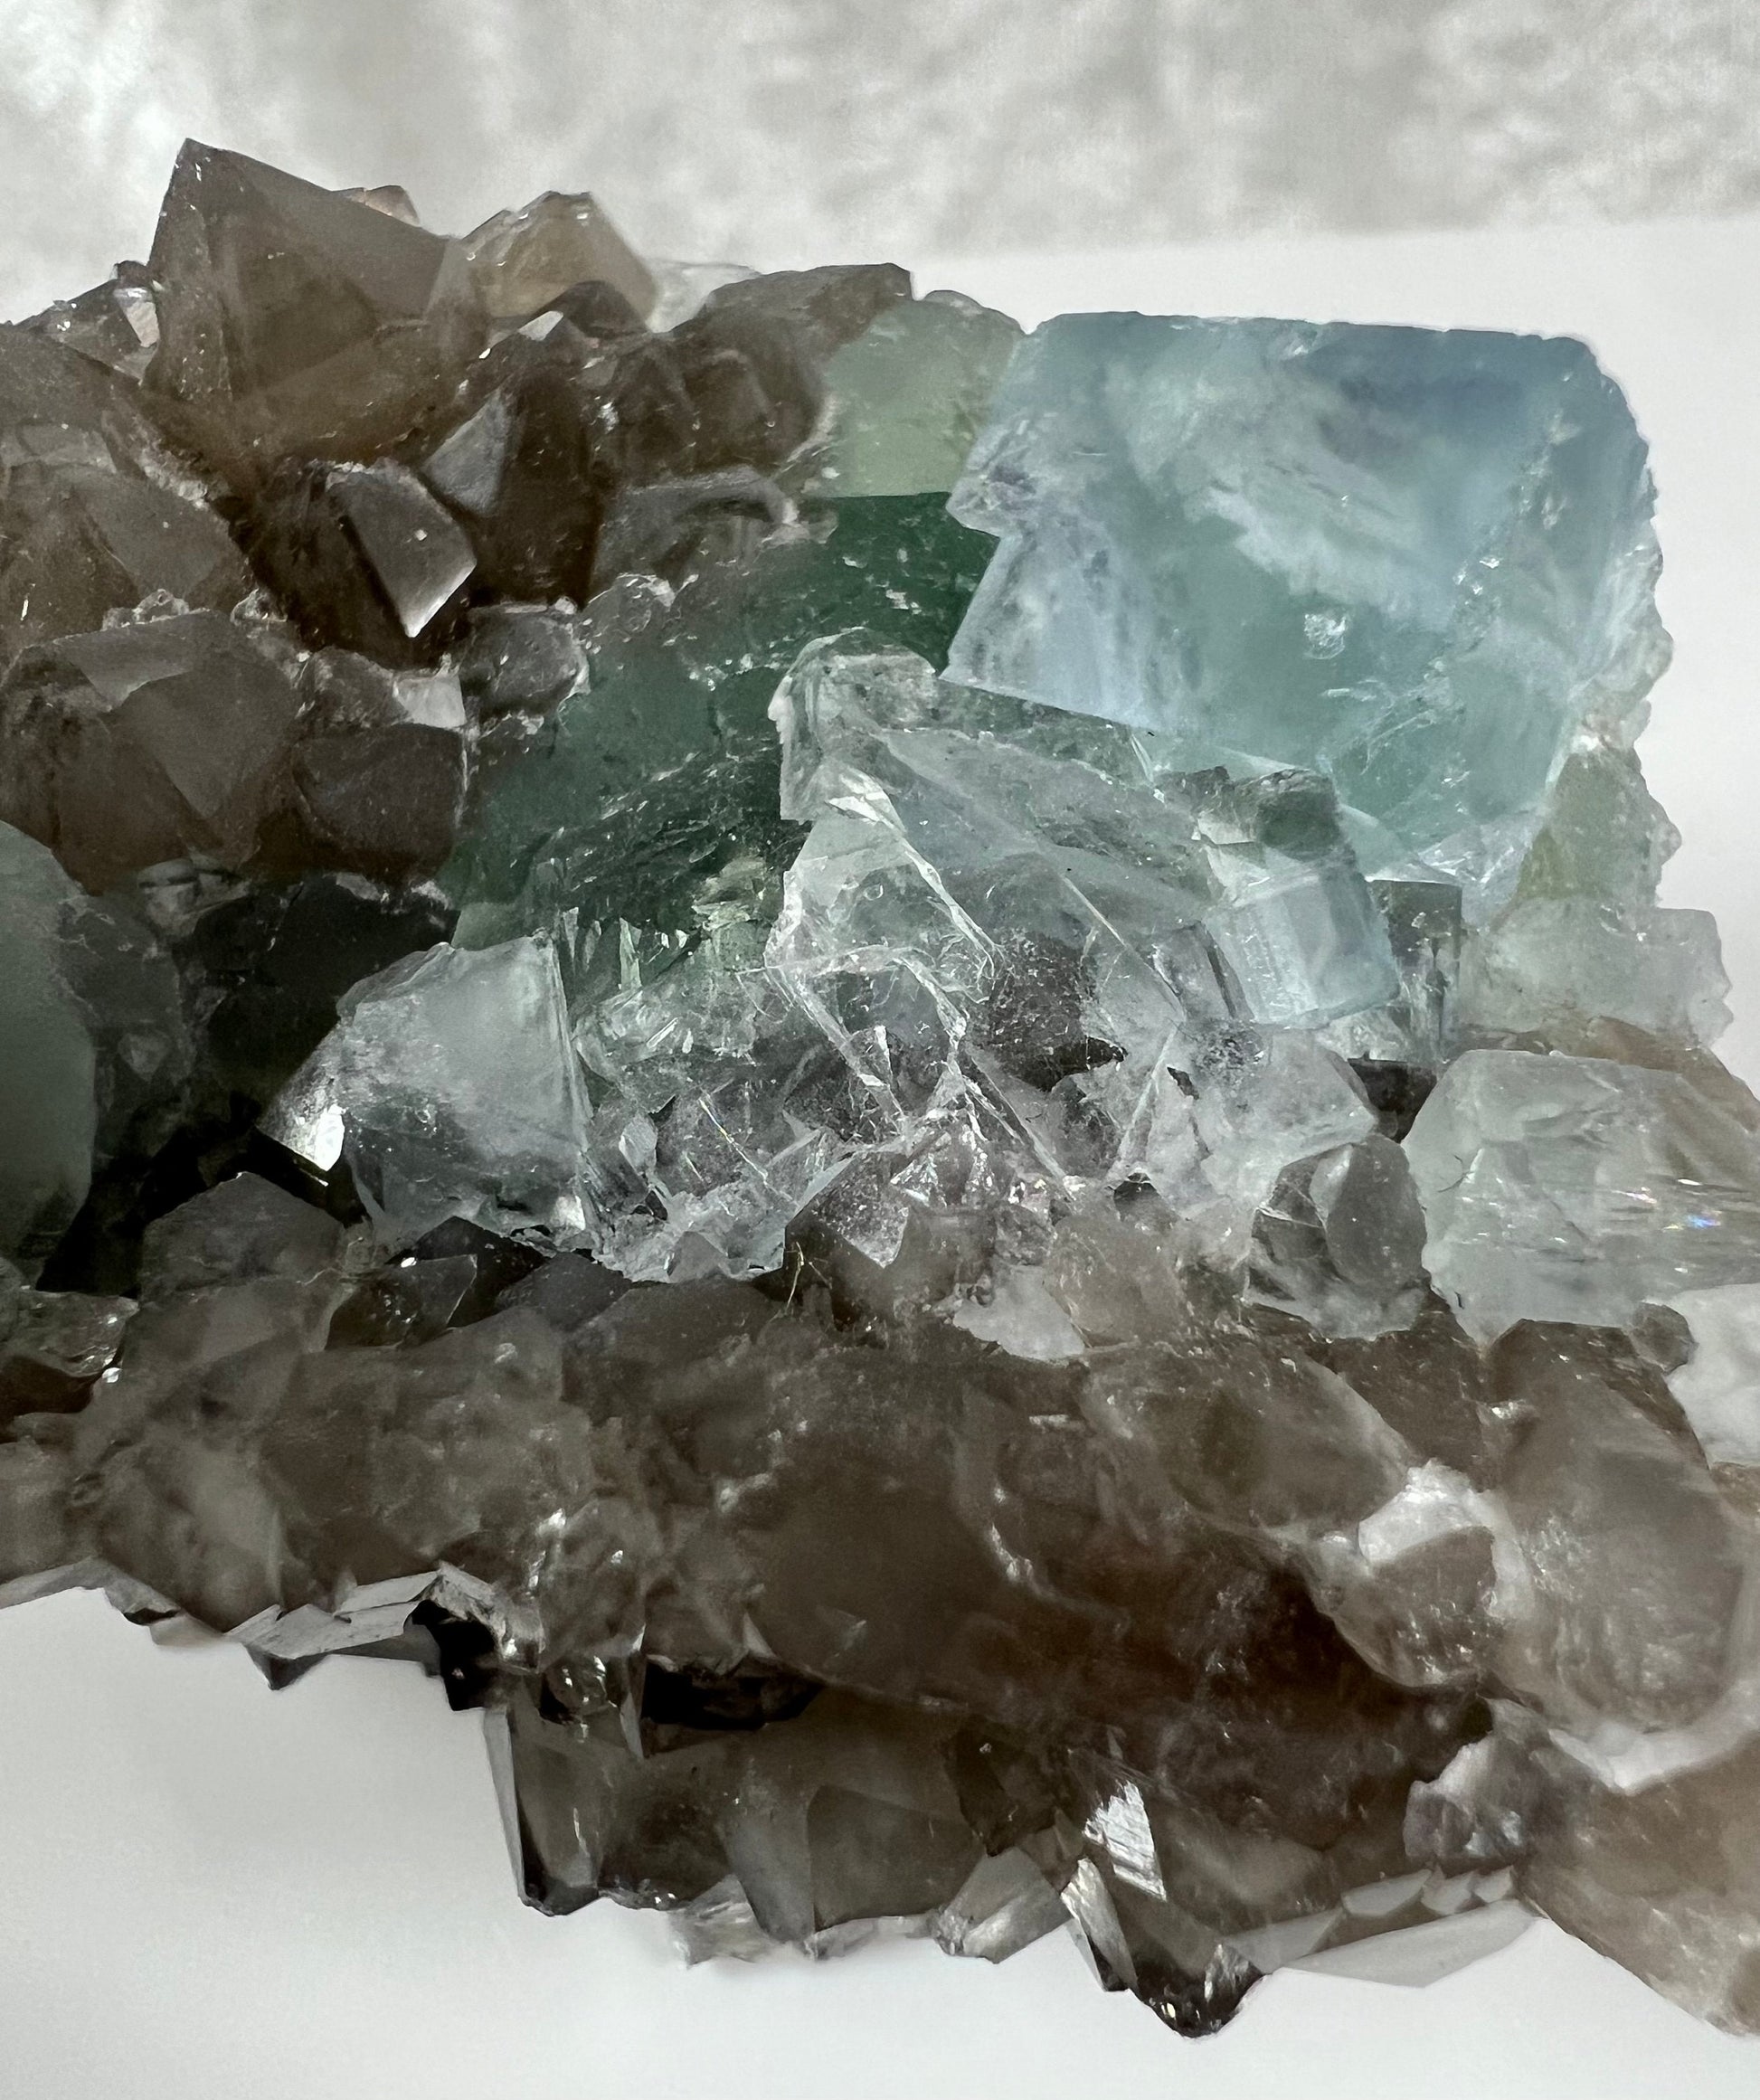 Gorgeous Xianghualing Ice Blue Fluorite And Smoky Quartz Cluster. Incredible Clear Blue Fluorite Cubes On Smoky Quartz Matrix.